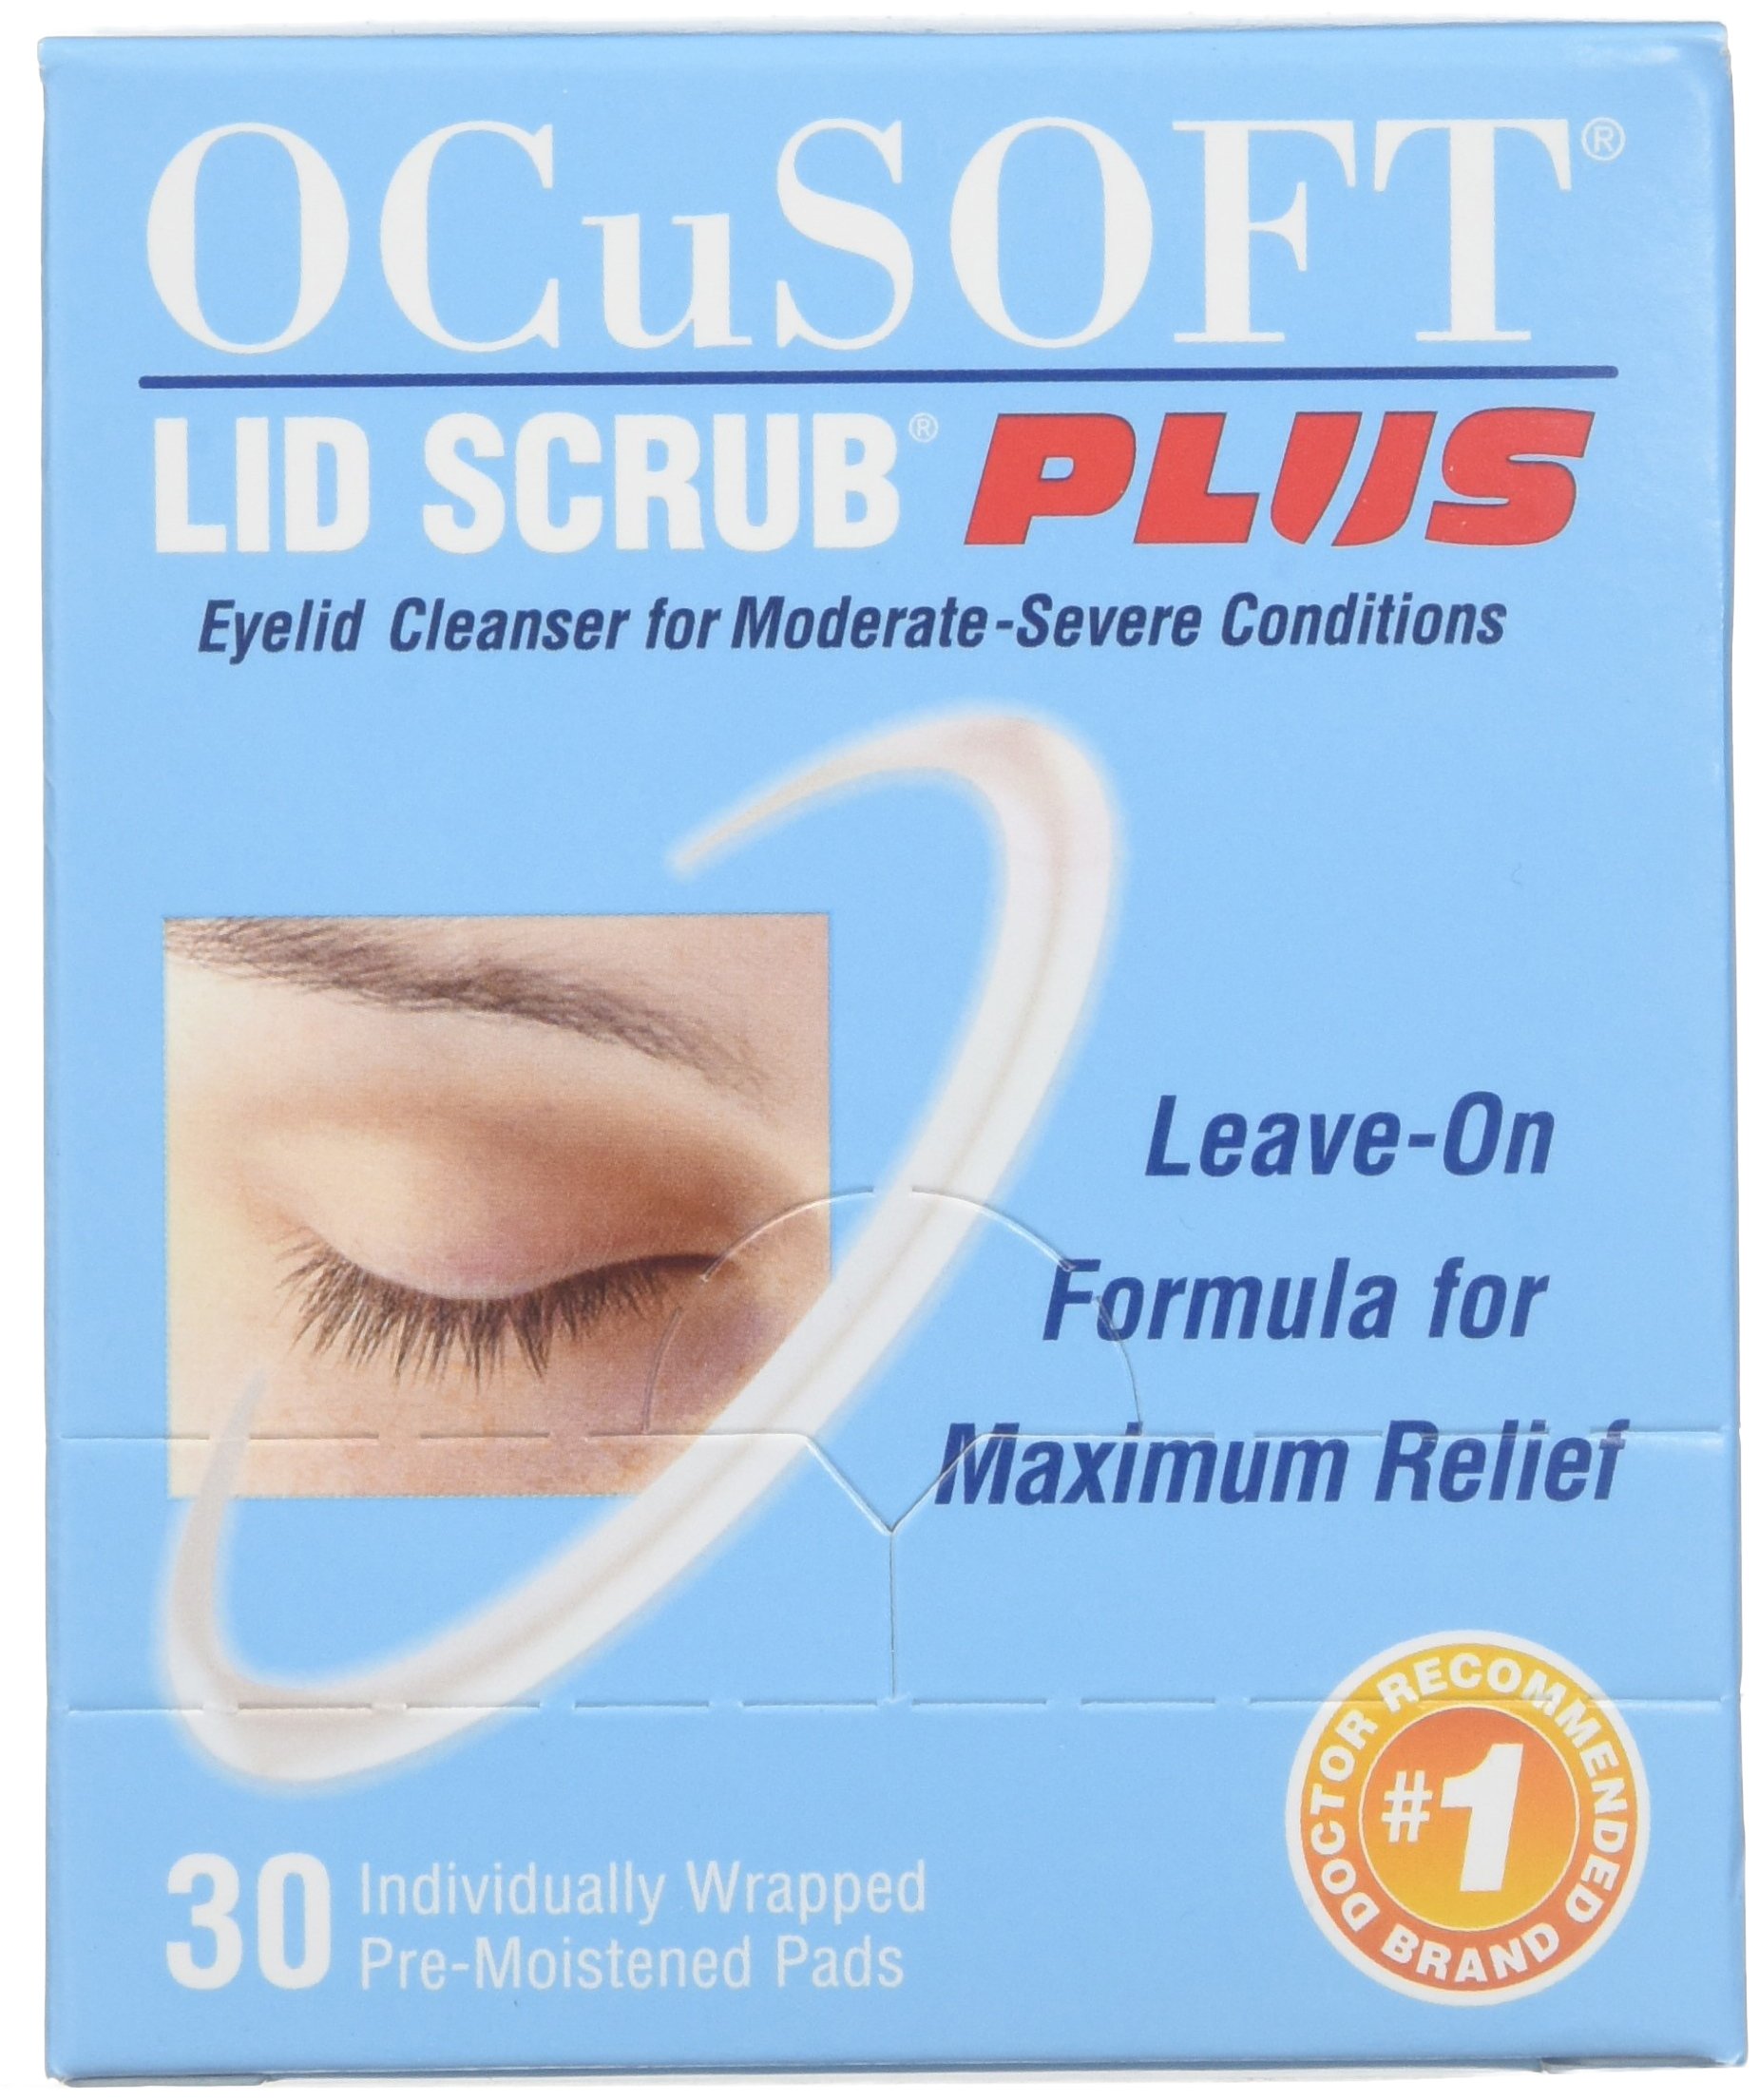 OCuSOFT Lid Scrub Plus, Pre-Moistened Pads, Individually Wrapped, 30 Count (Pack of 2)